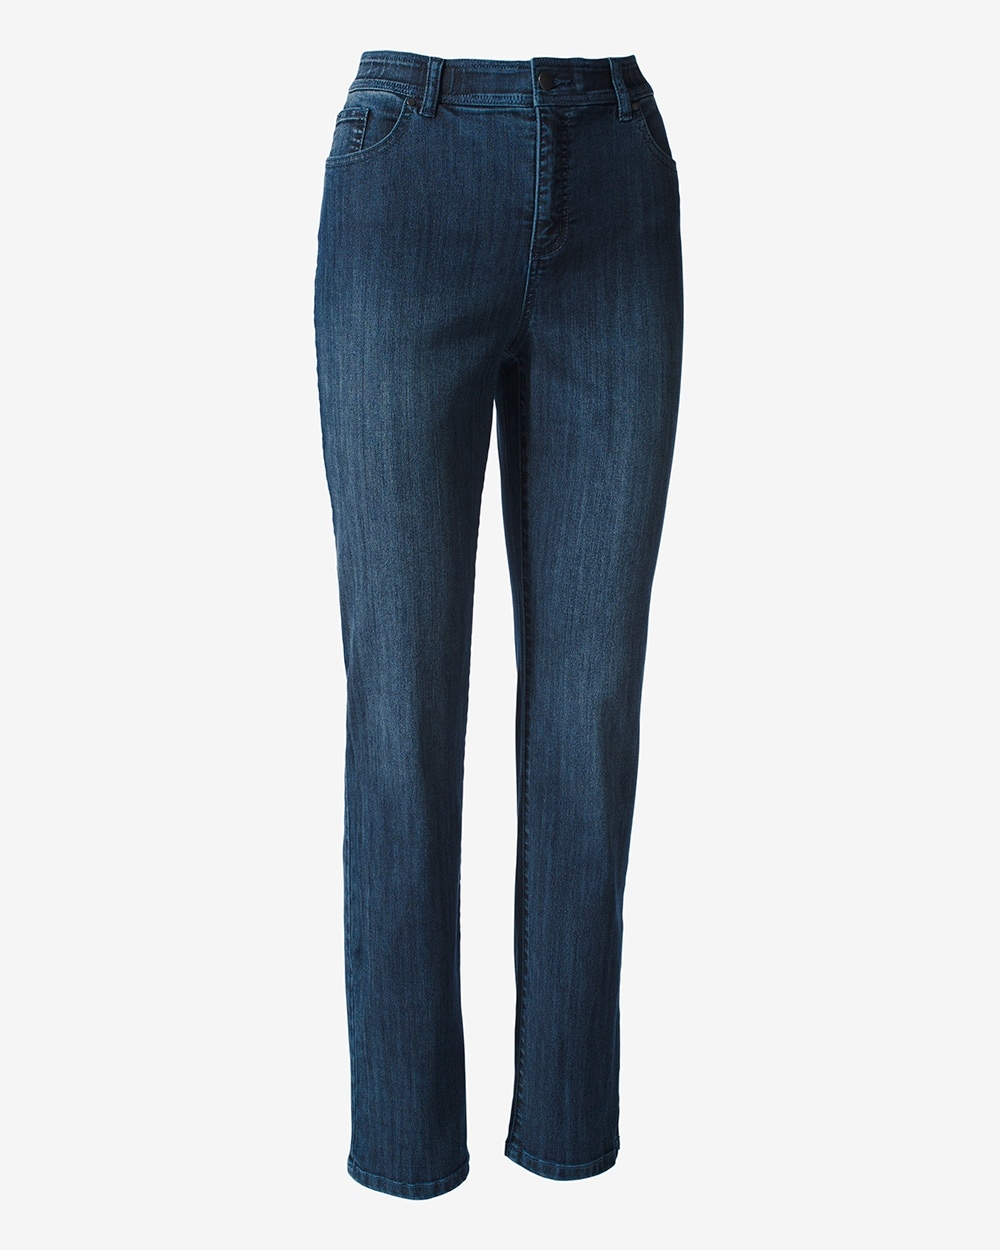 Fabulously Slimming Jeans